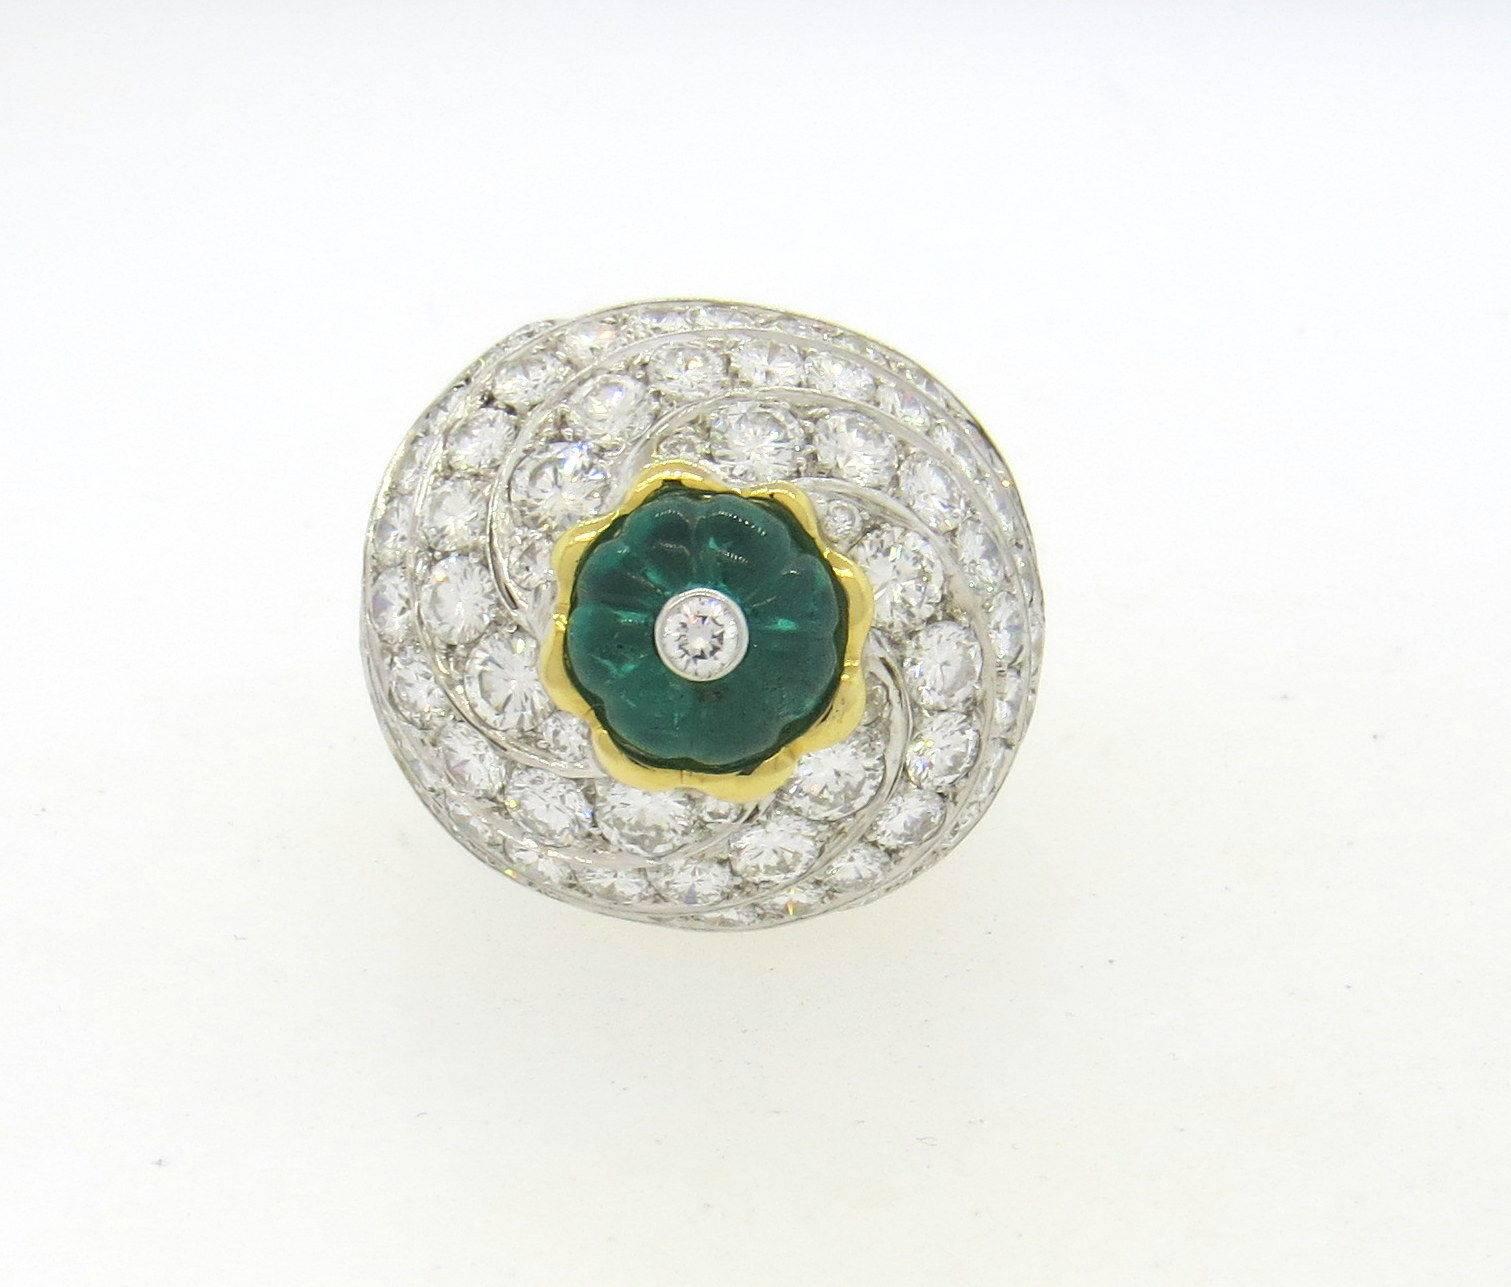 An 18k yellow gold and platinum ring set with a 3.76ct carved emerald and 8 carats of G/VS diamonds.  Crafted by David Webb, the ring is a size 6 1/2, ring top is 22mm x 24mm, sits approx. 20m from the finger.  Marked: David Webb 900pt, 18k, DS118. 